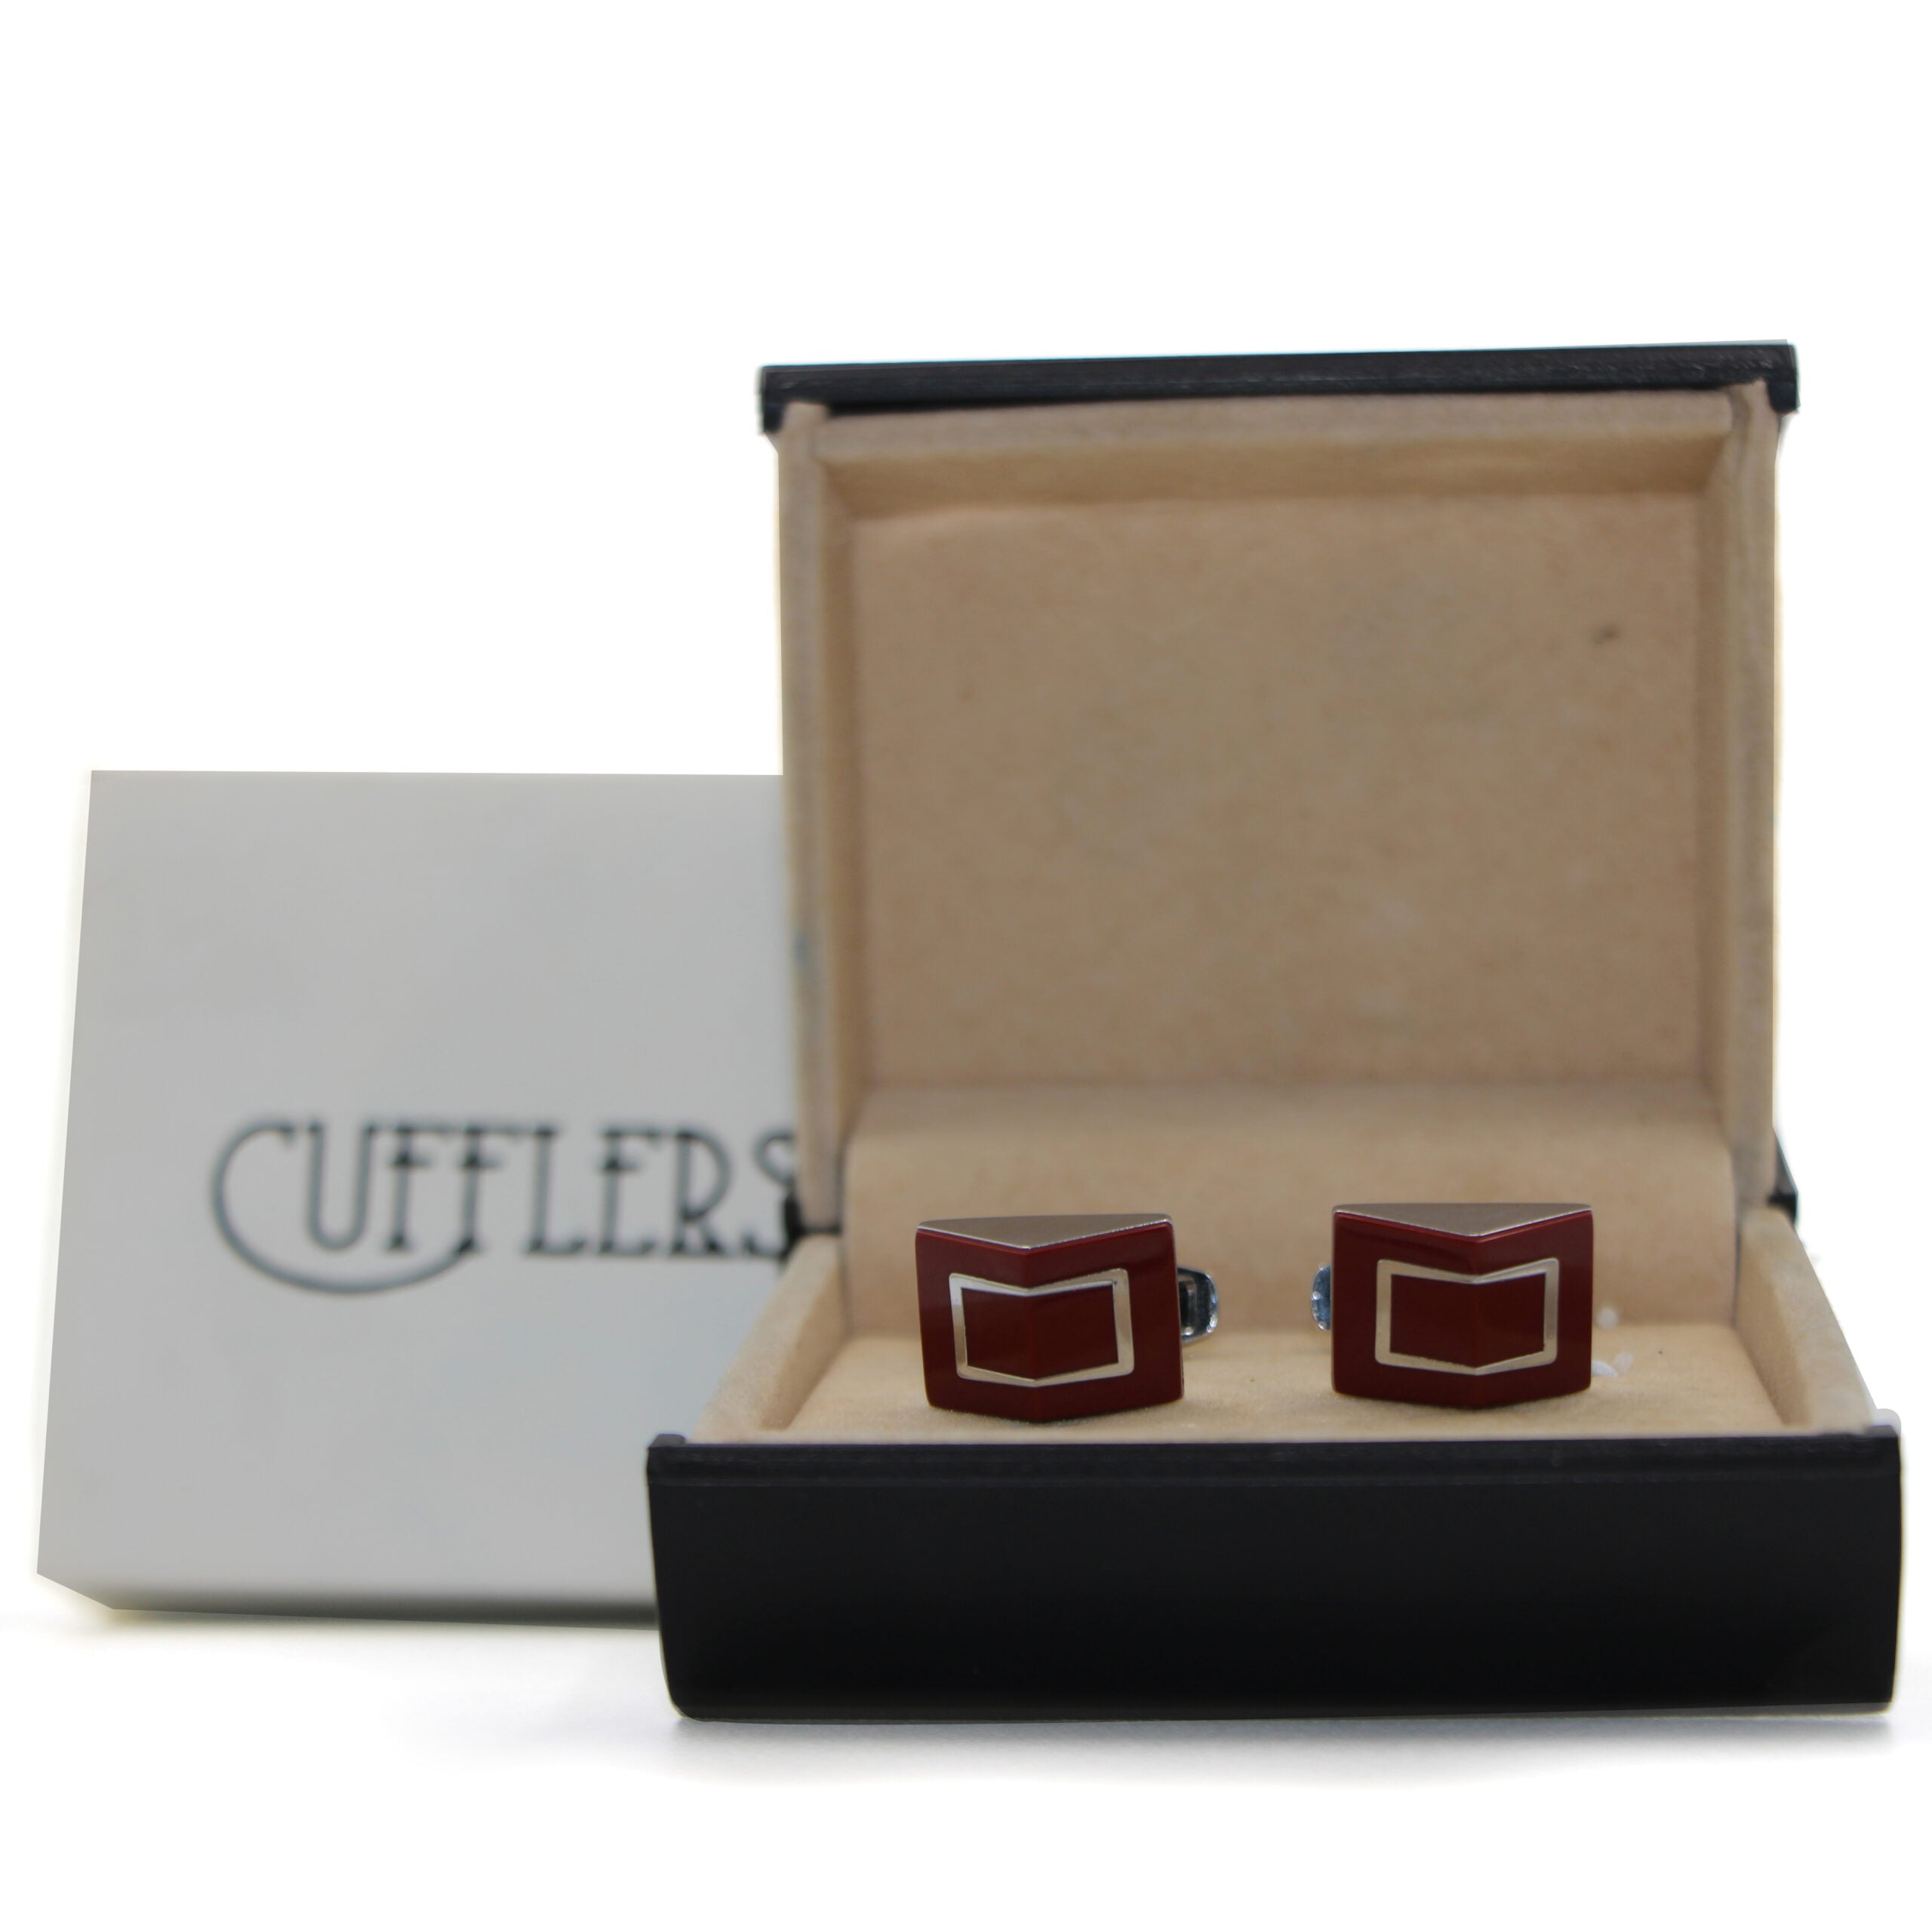 Vintage Cufflinks for Men's Shirt with a Gift Box - CU-1005